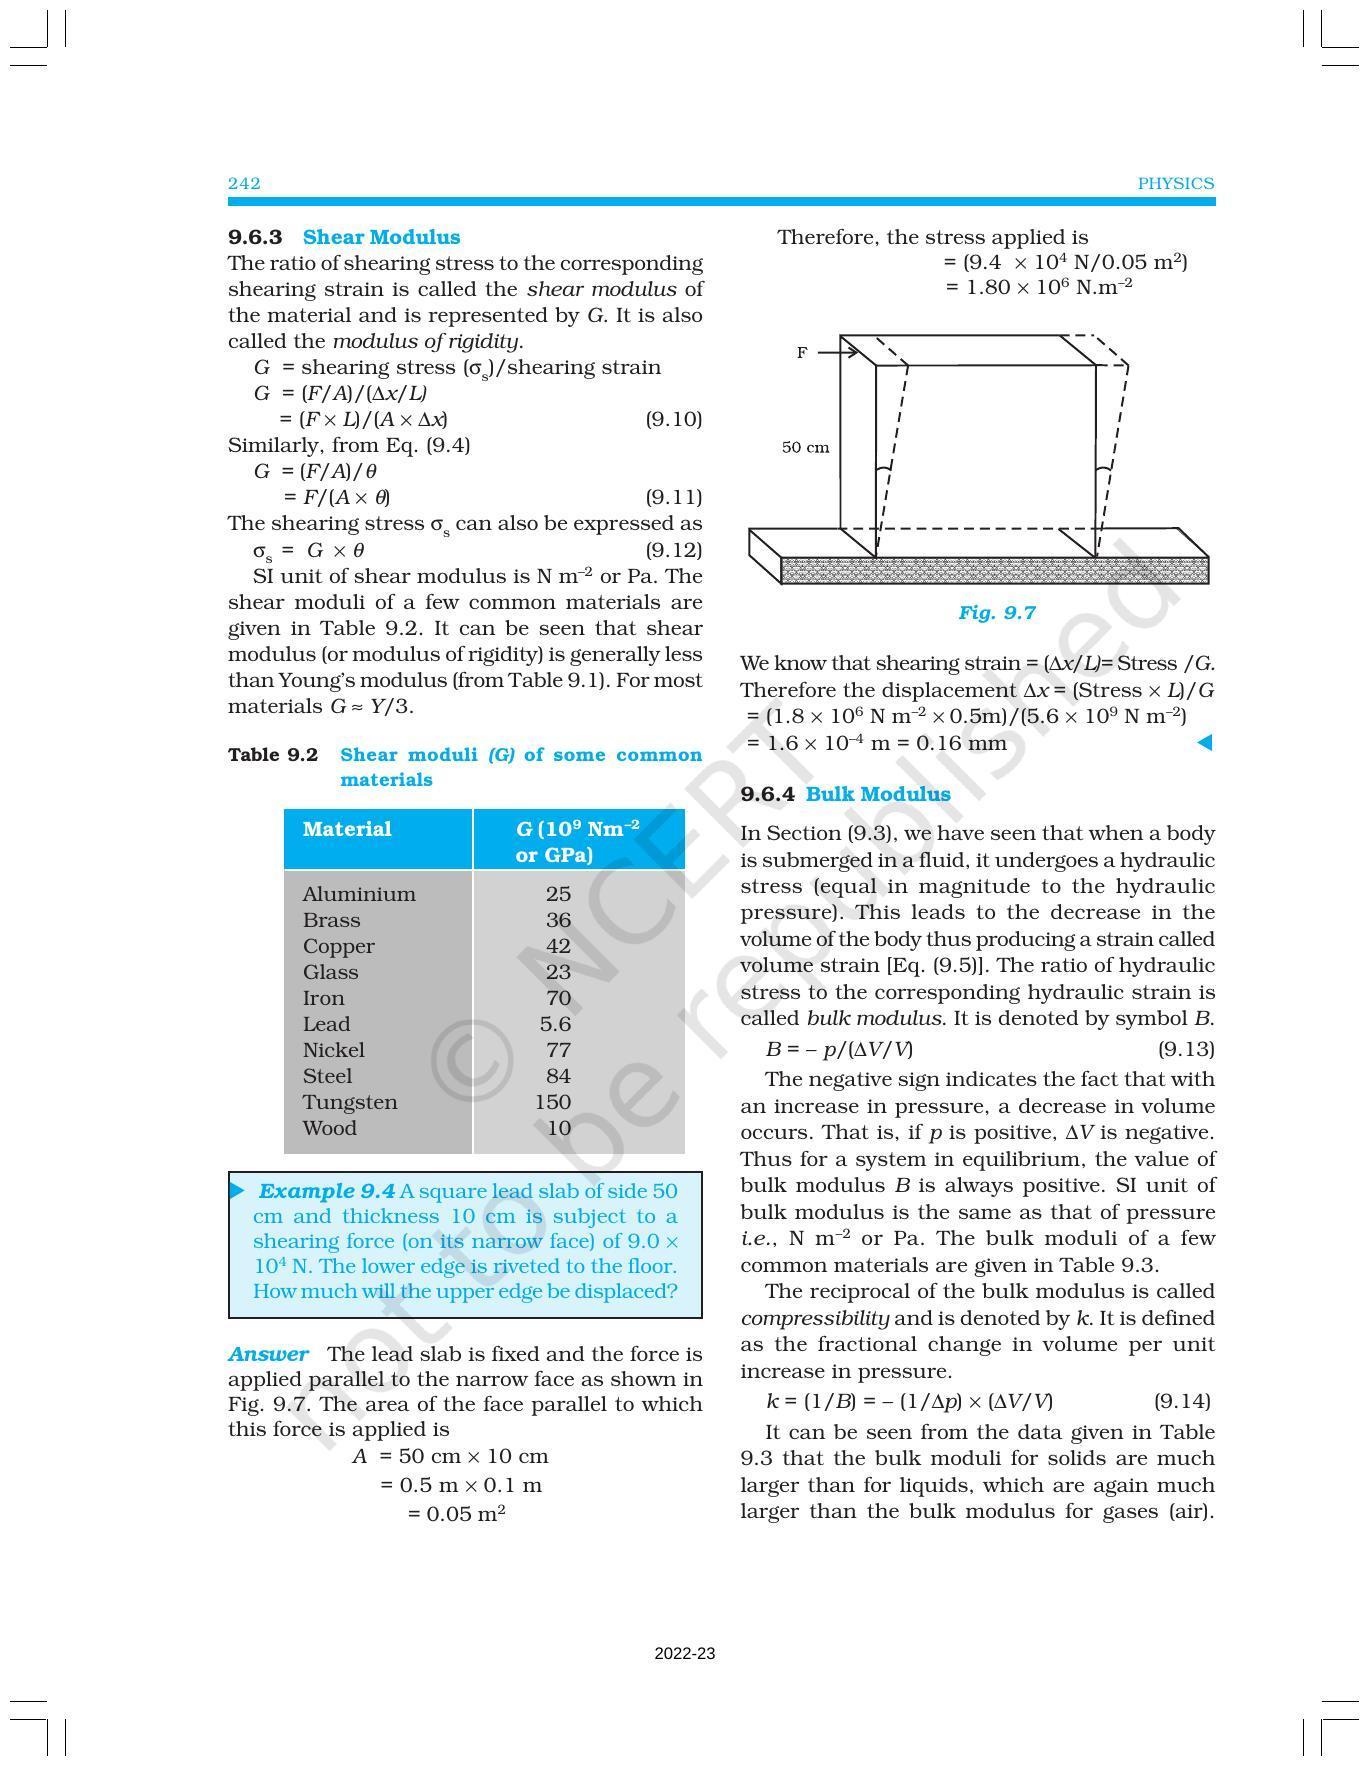 NCERT Book for Class 11 Physics Chapter 9 Mechanical Properties of Solids - Page 8